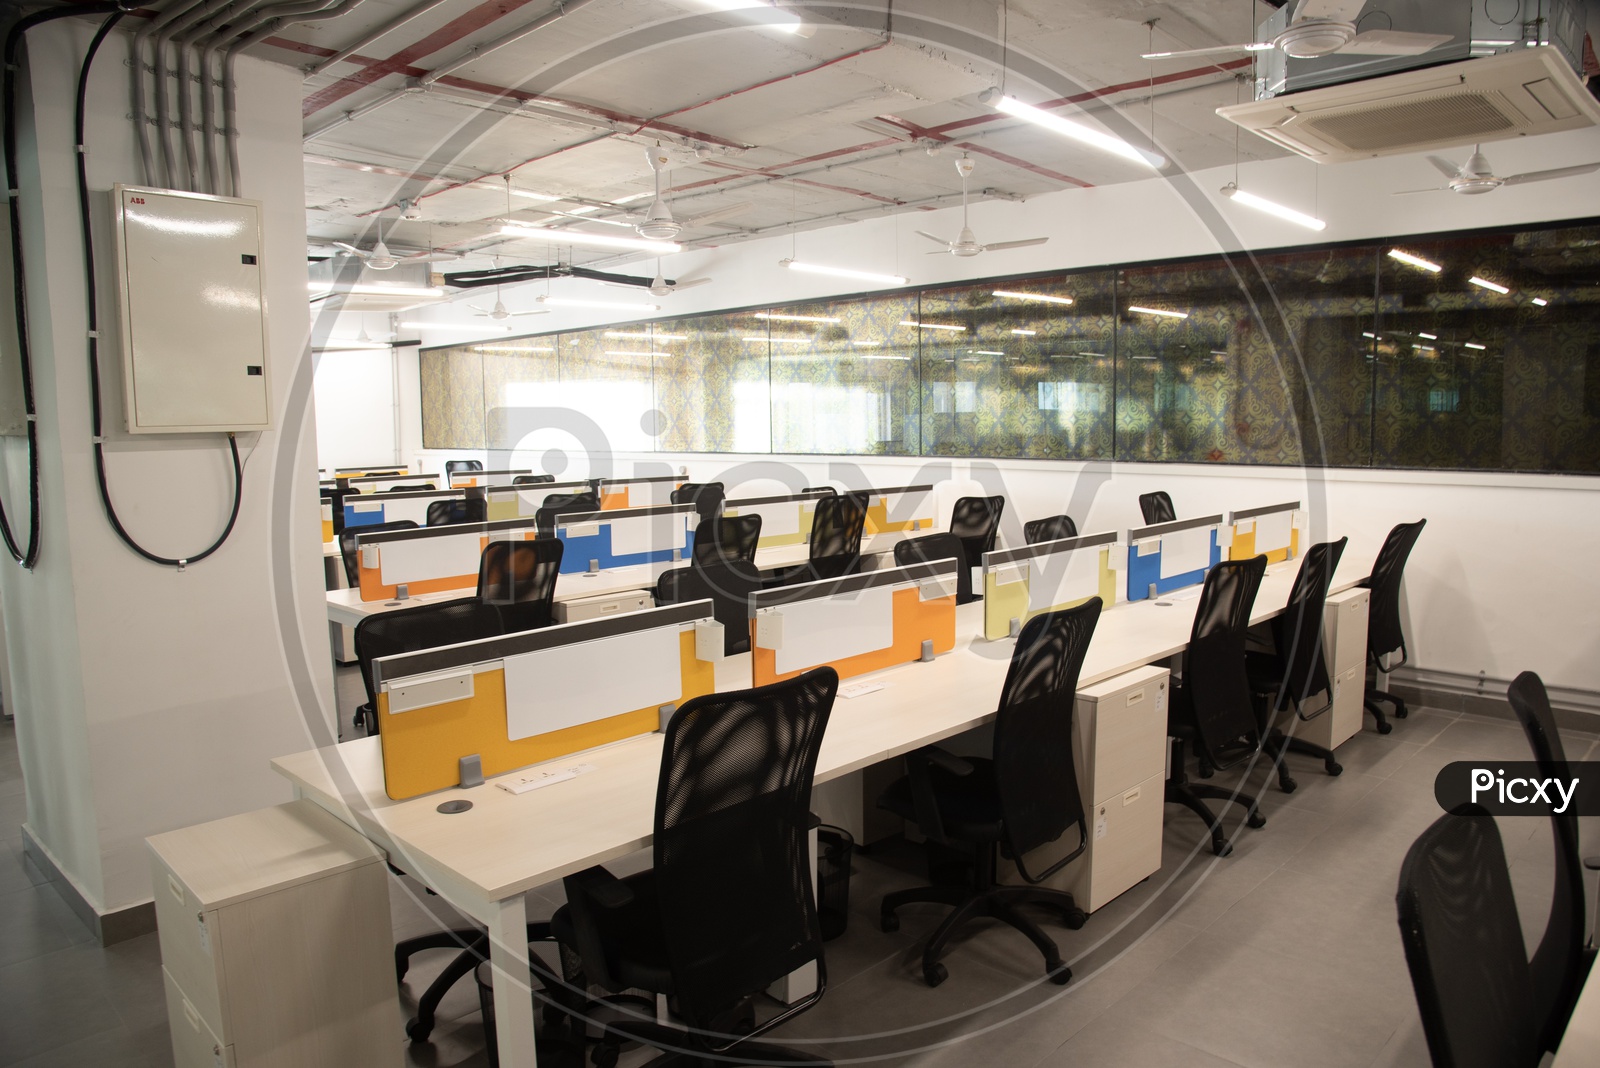 Coworking Spaces, Corporate Office Work Spaces, Cabins